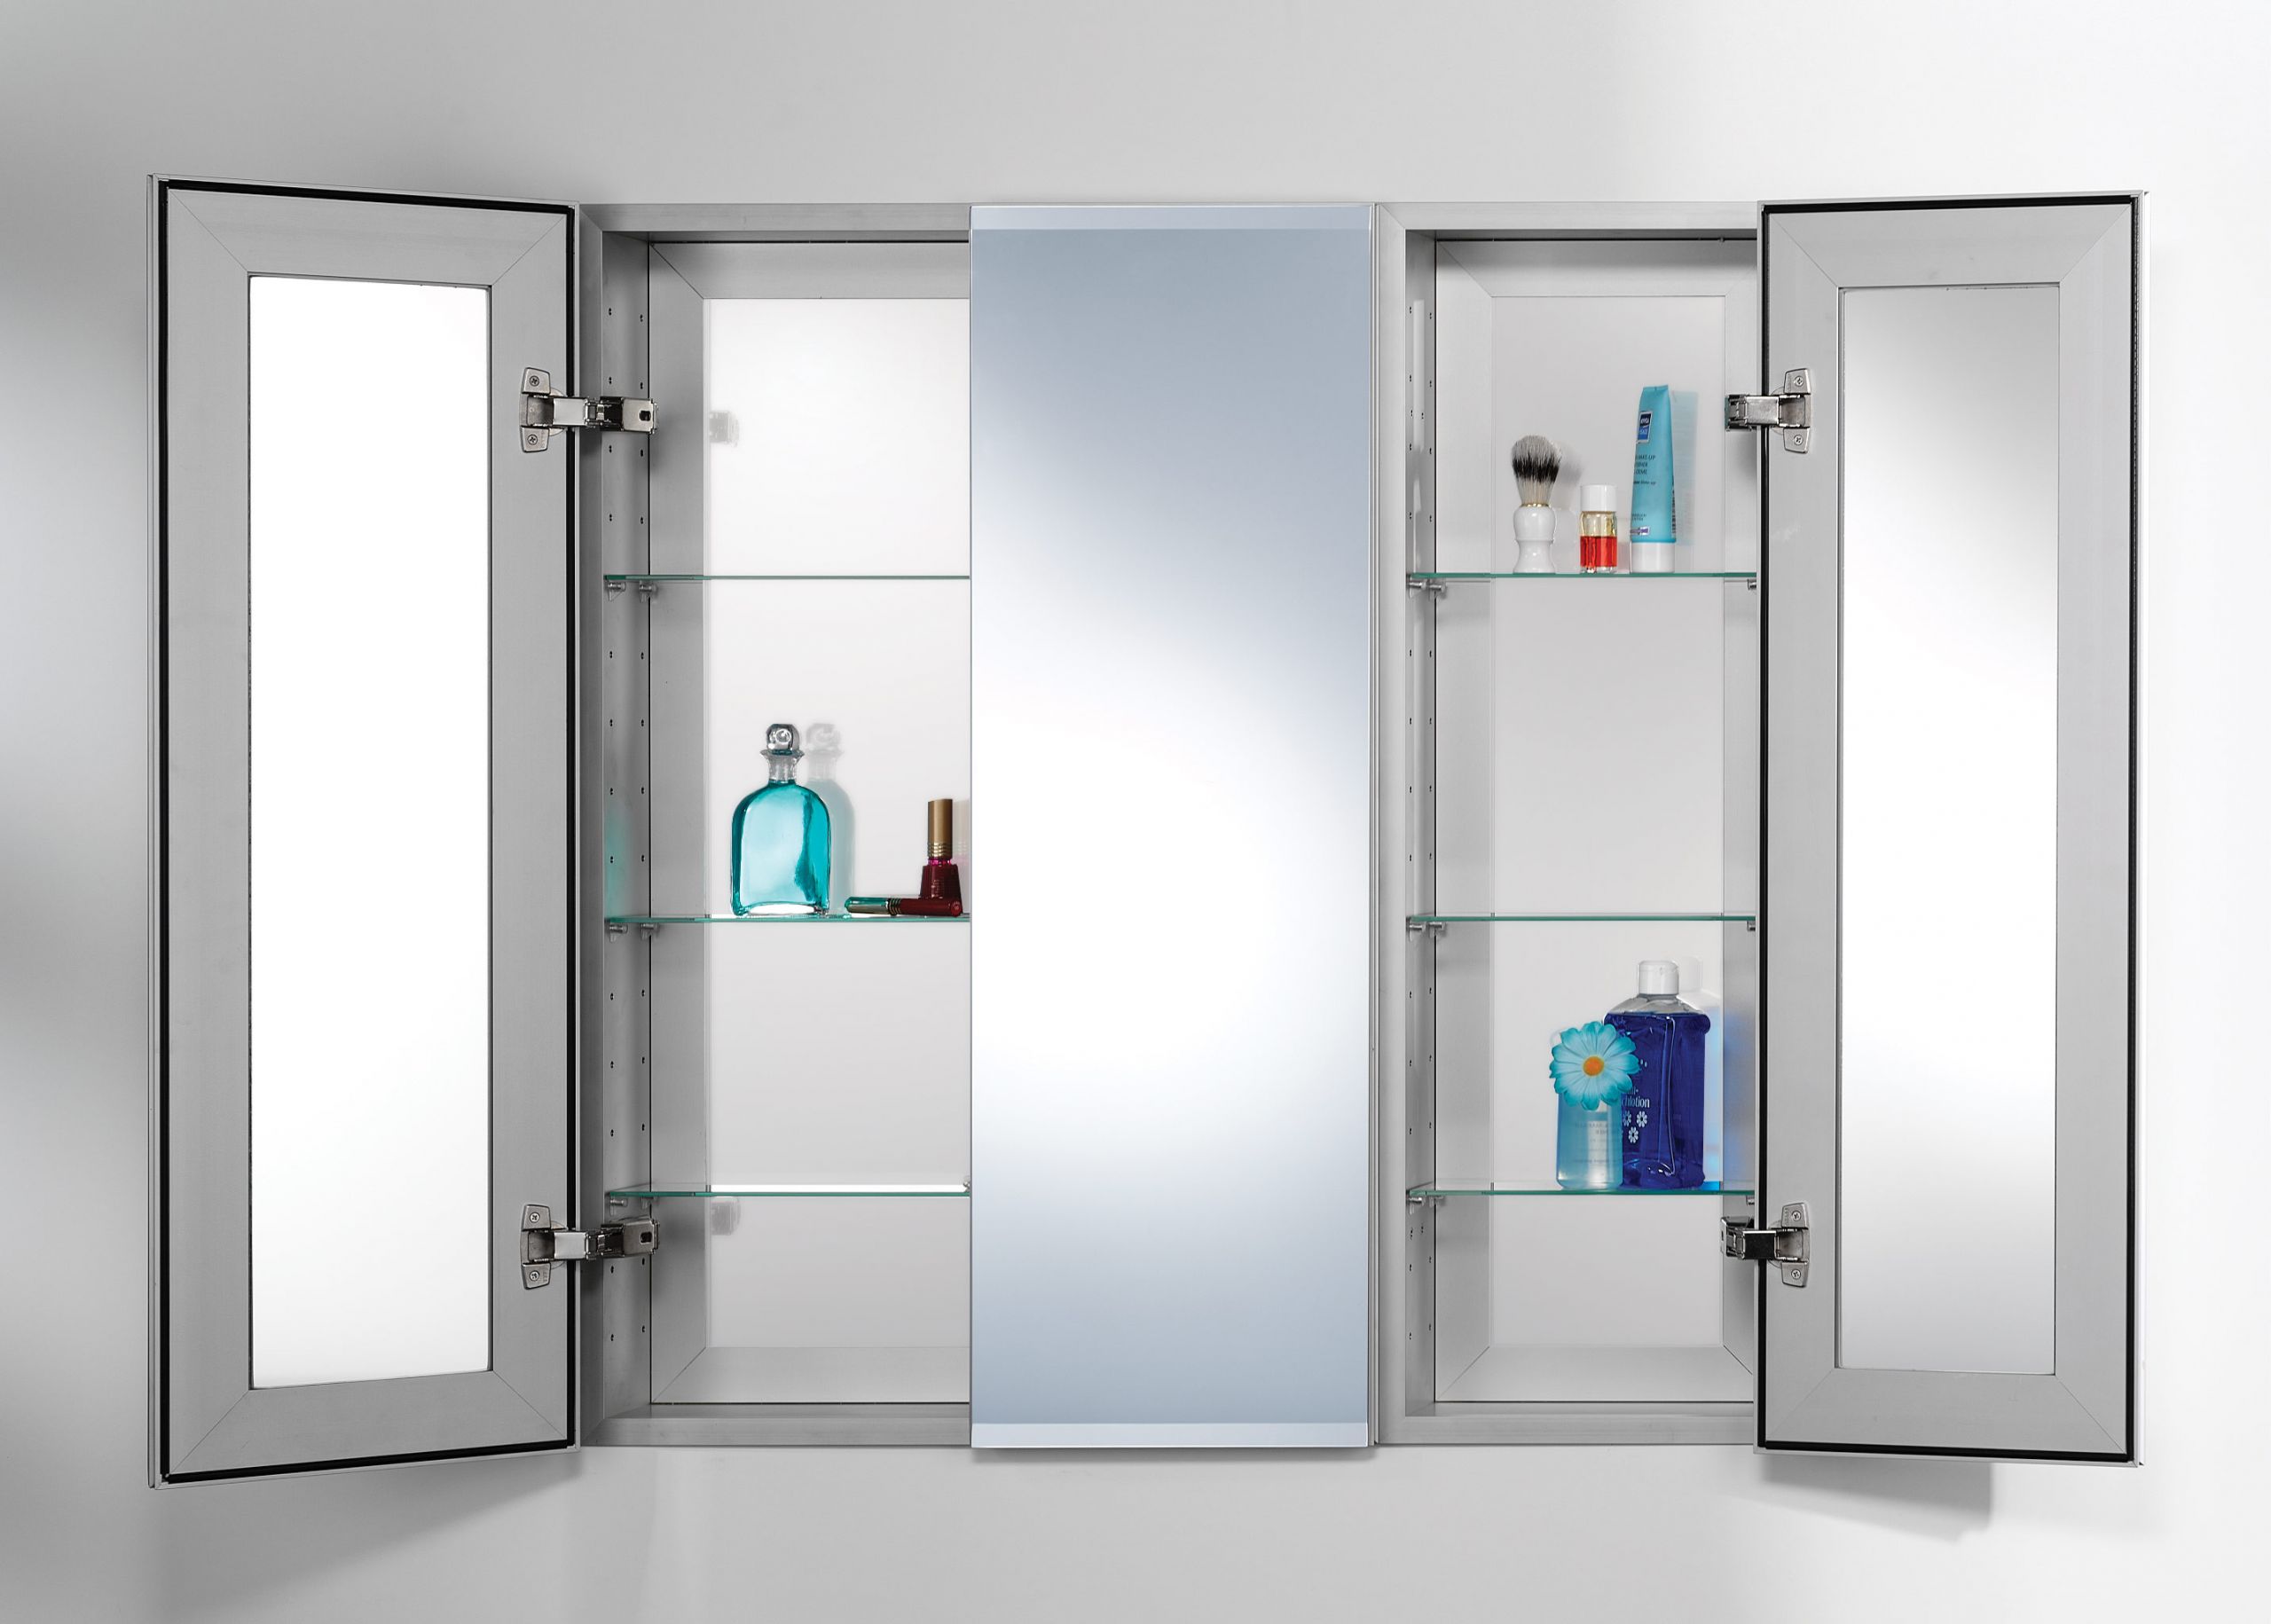 Mirrored Bathroom Cabinets
 Bathroom Medicine Cabinets – With Lights Recessed Mirrored